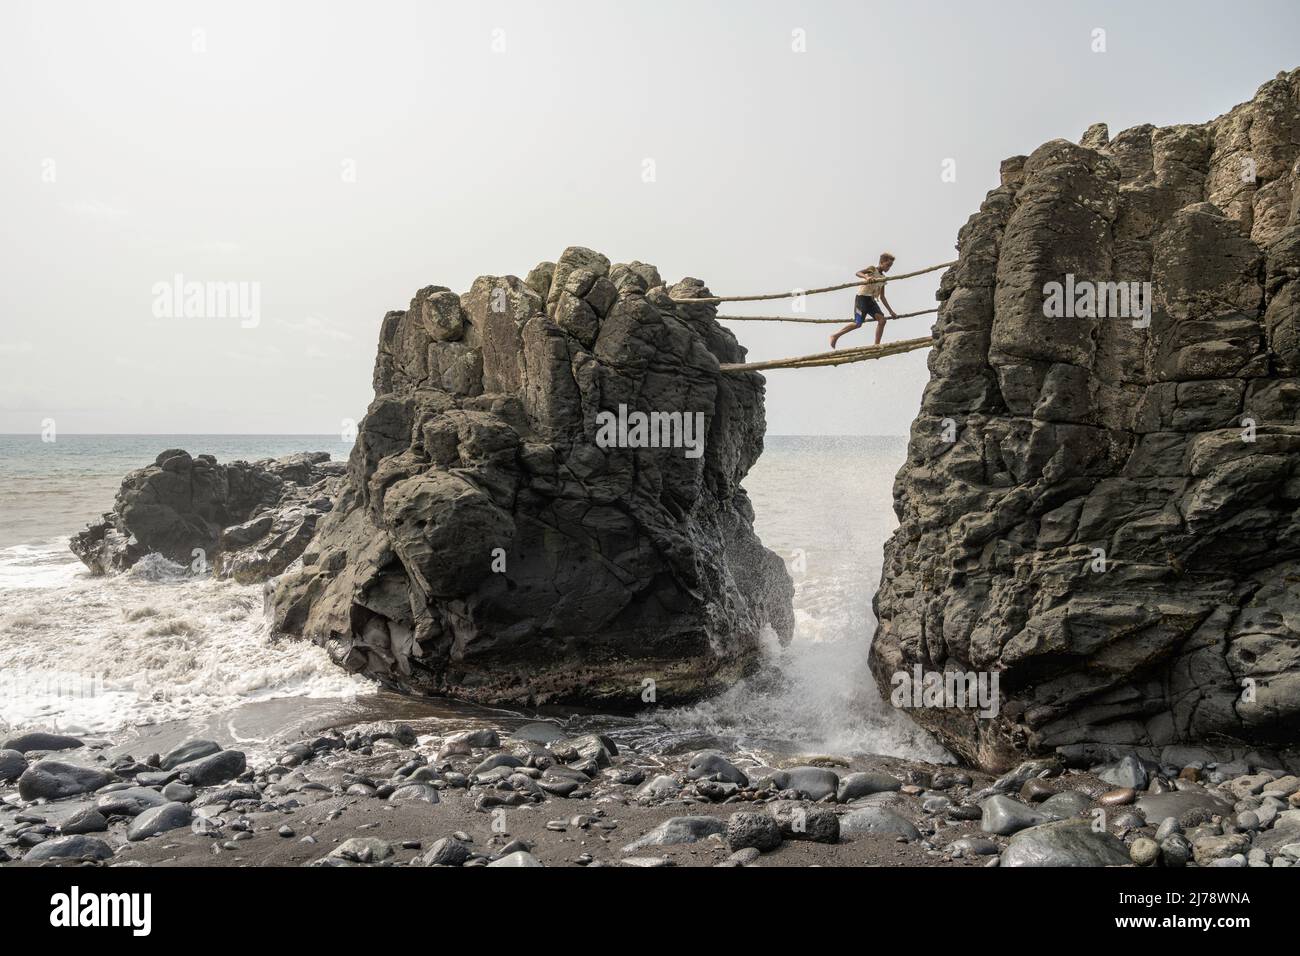 Boy crossing a precarious bridge made of logs while the waves beat on the rocks. Stock Photo